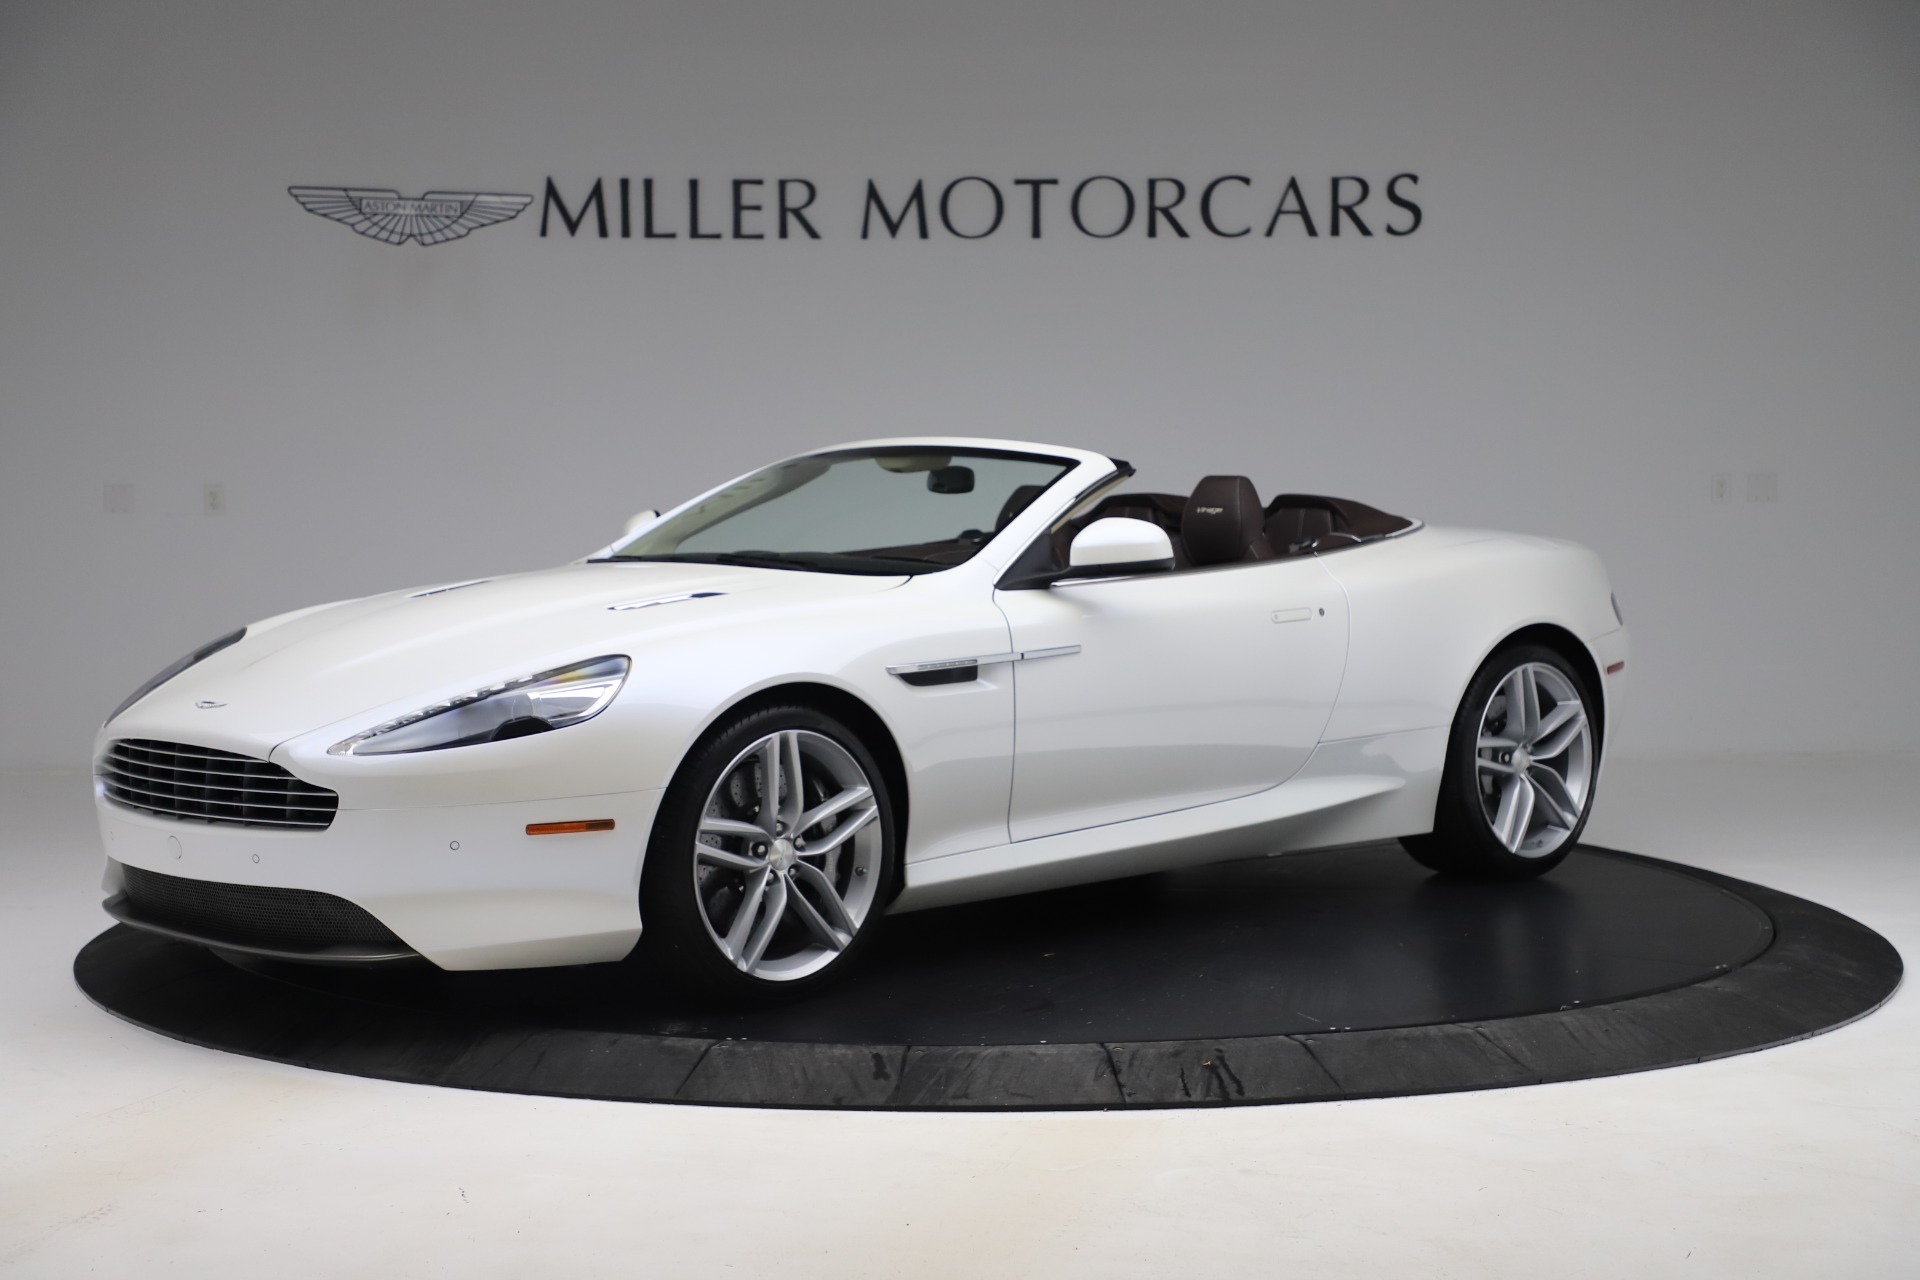 Used 2012 Aston Martin Virage Volante for sale Sold at Rolls-Royce Motor Cars Greenwich in Greenwich CT 06830 1